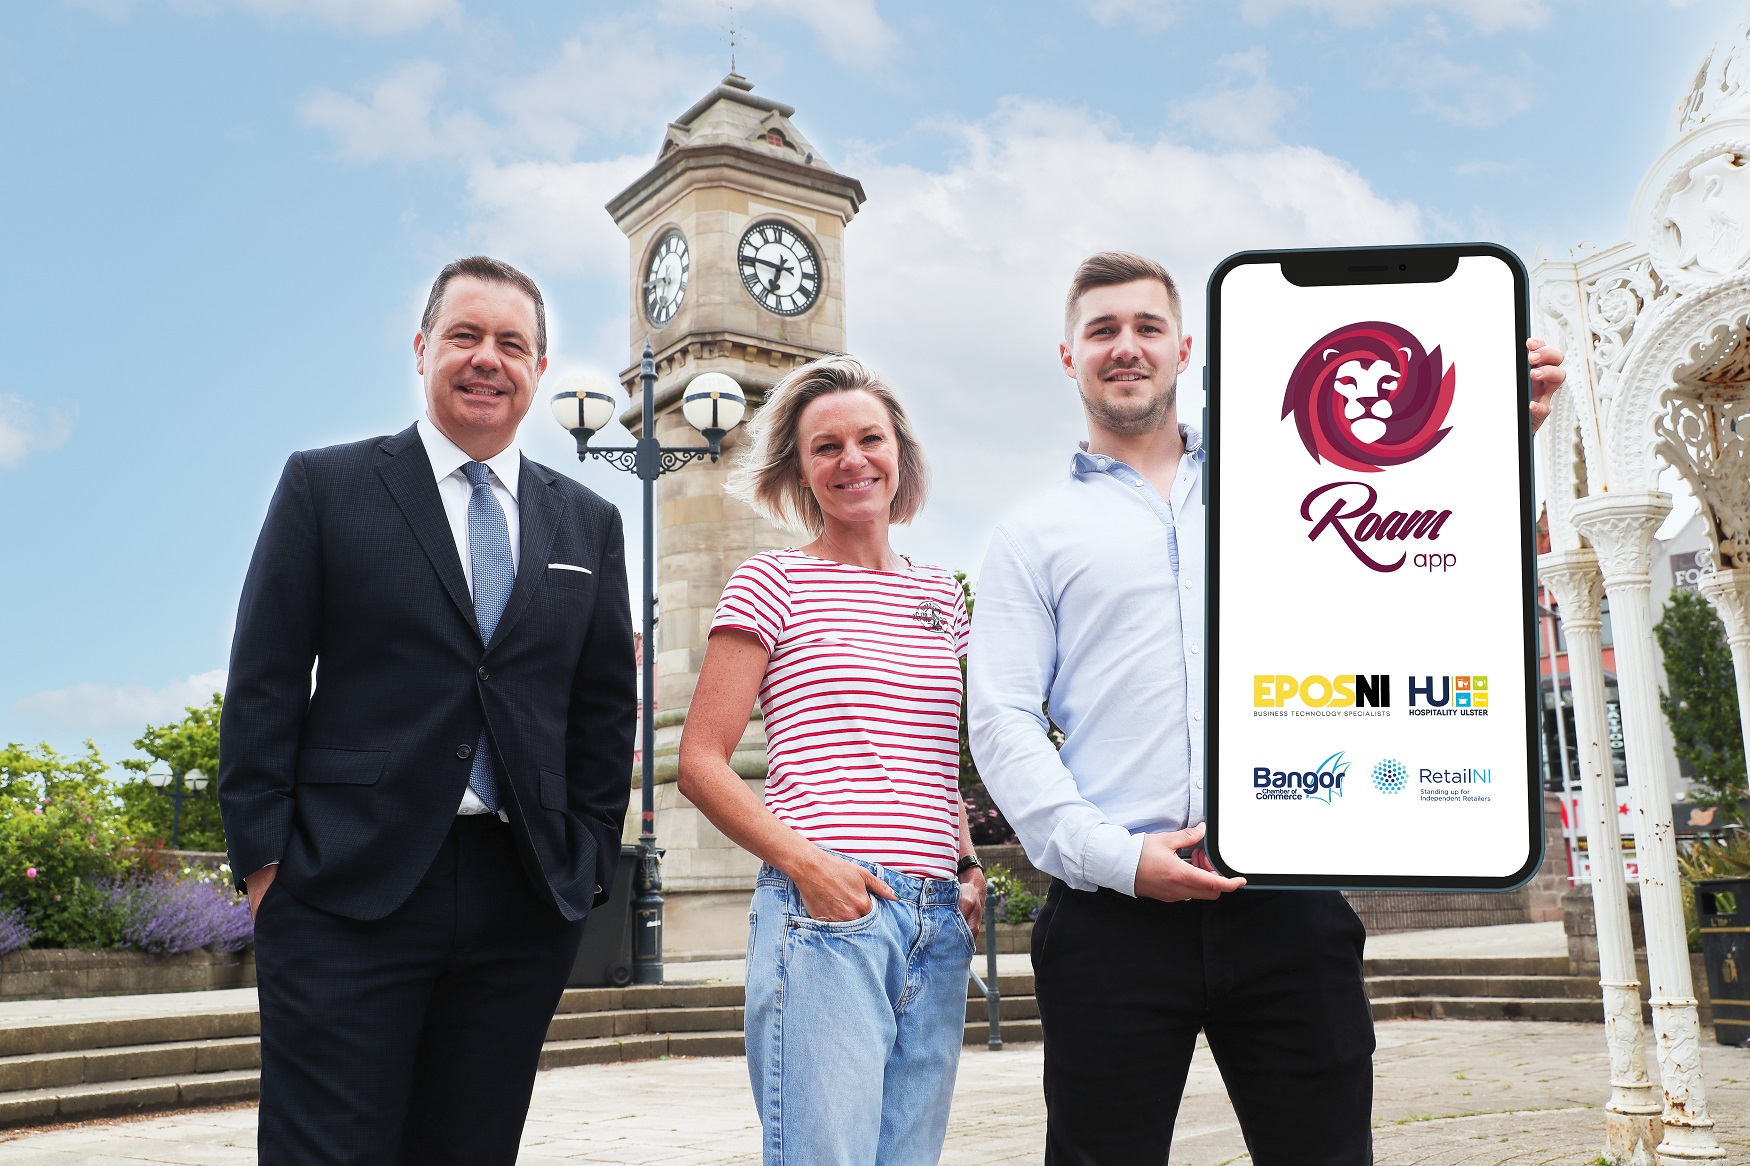 Bangor first city in Northern Ireland to launch Roam Local app